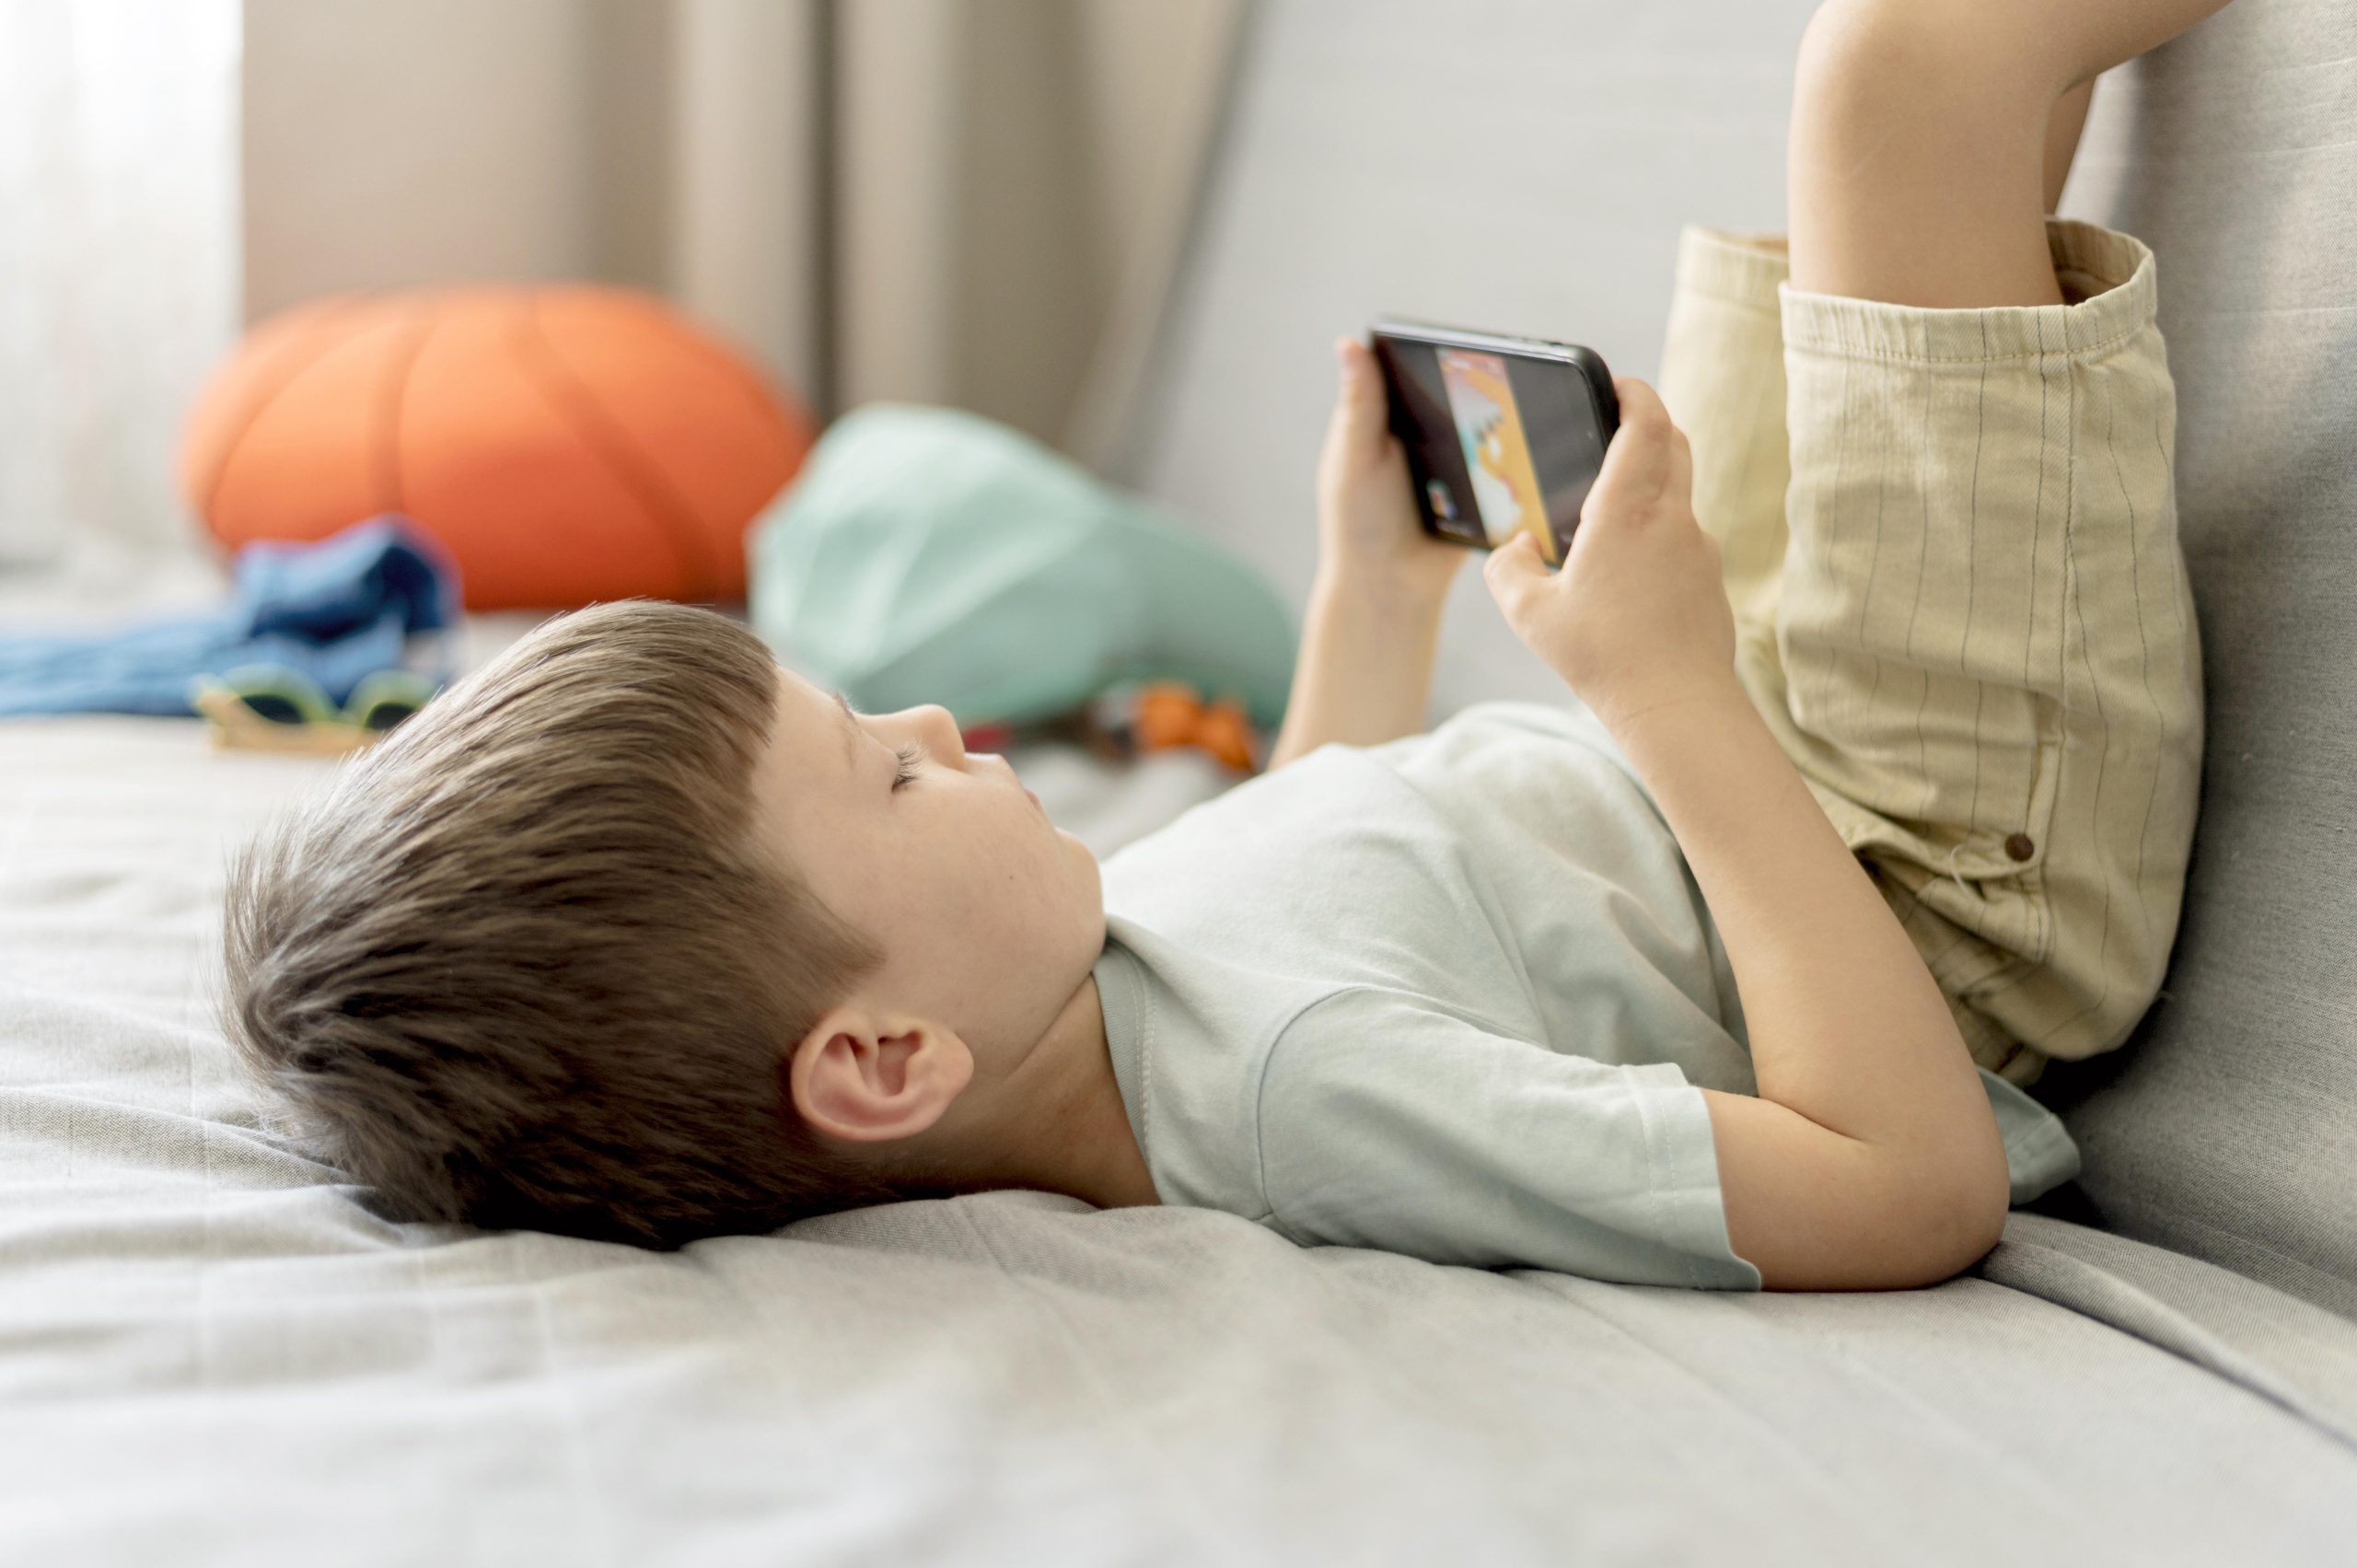 Promoting Healthy Screen Time Habits for Kids in the TikTok Era